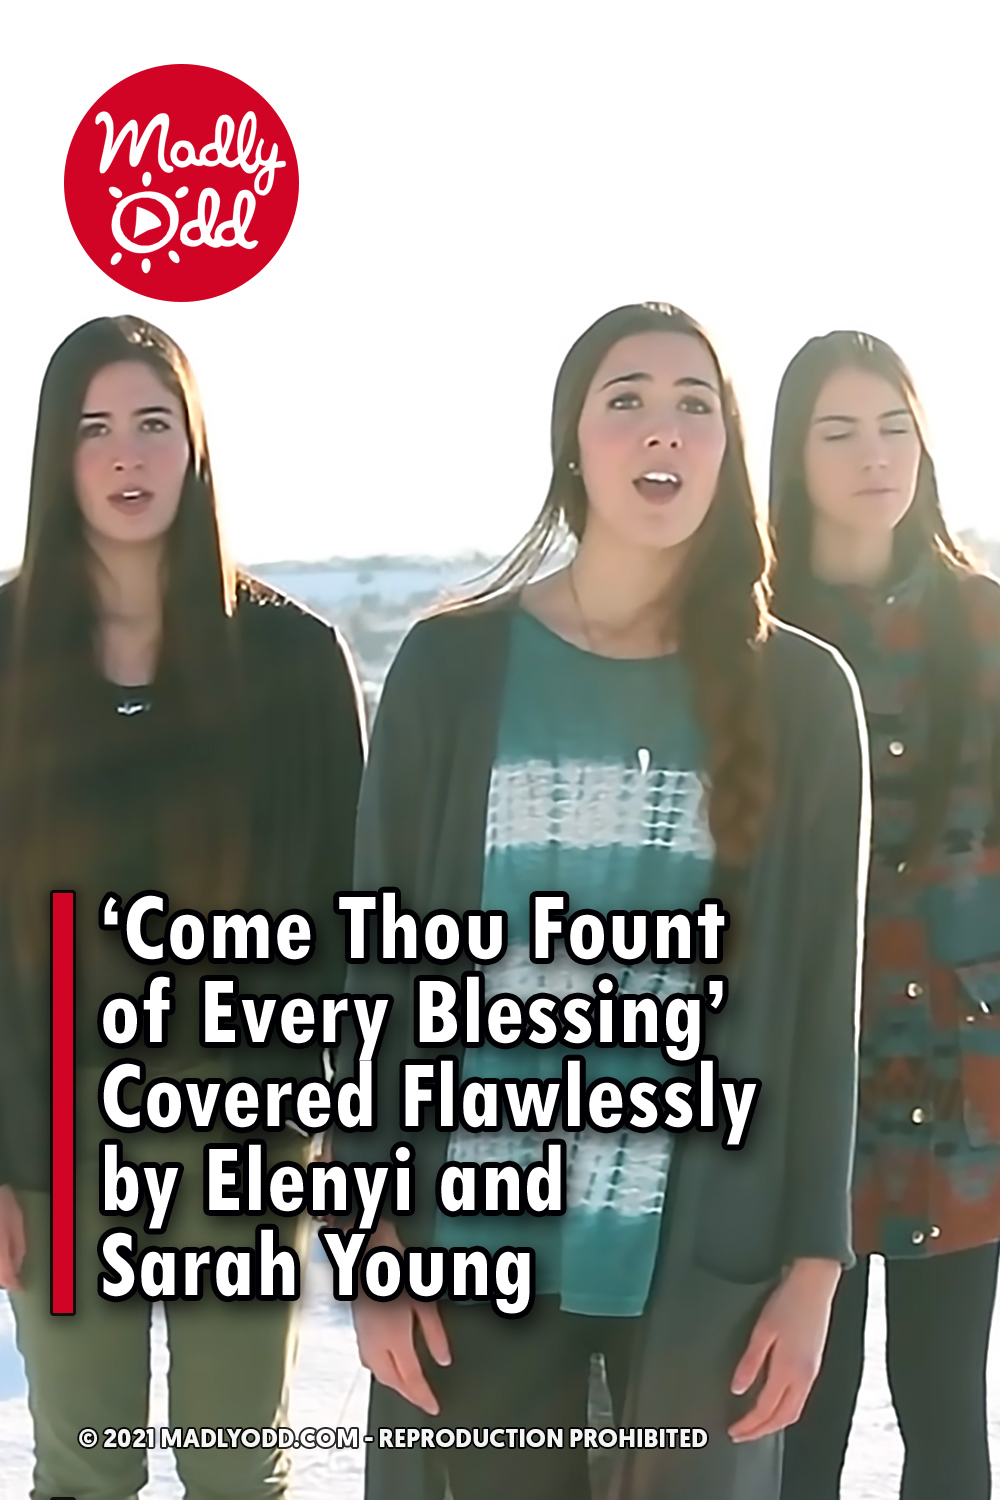 ‘Come Thou Fount of Every Blessing’ Covered Flawlessly by Elenyi and Sarah Young